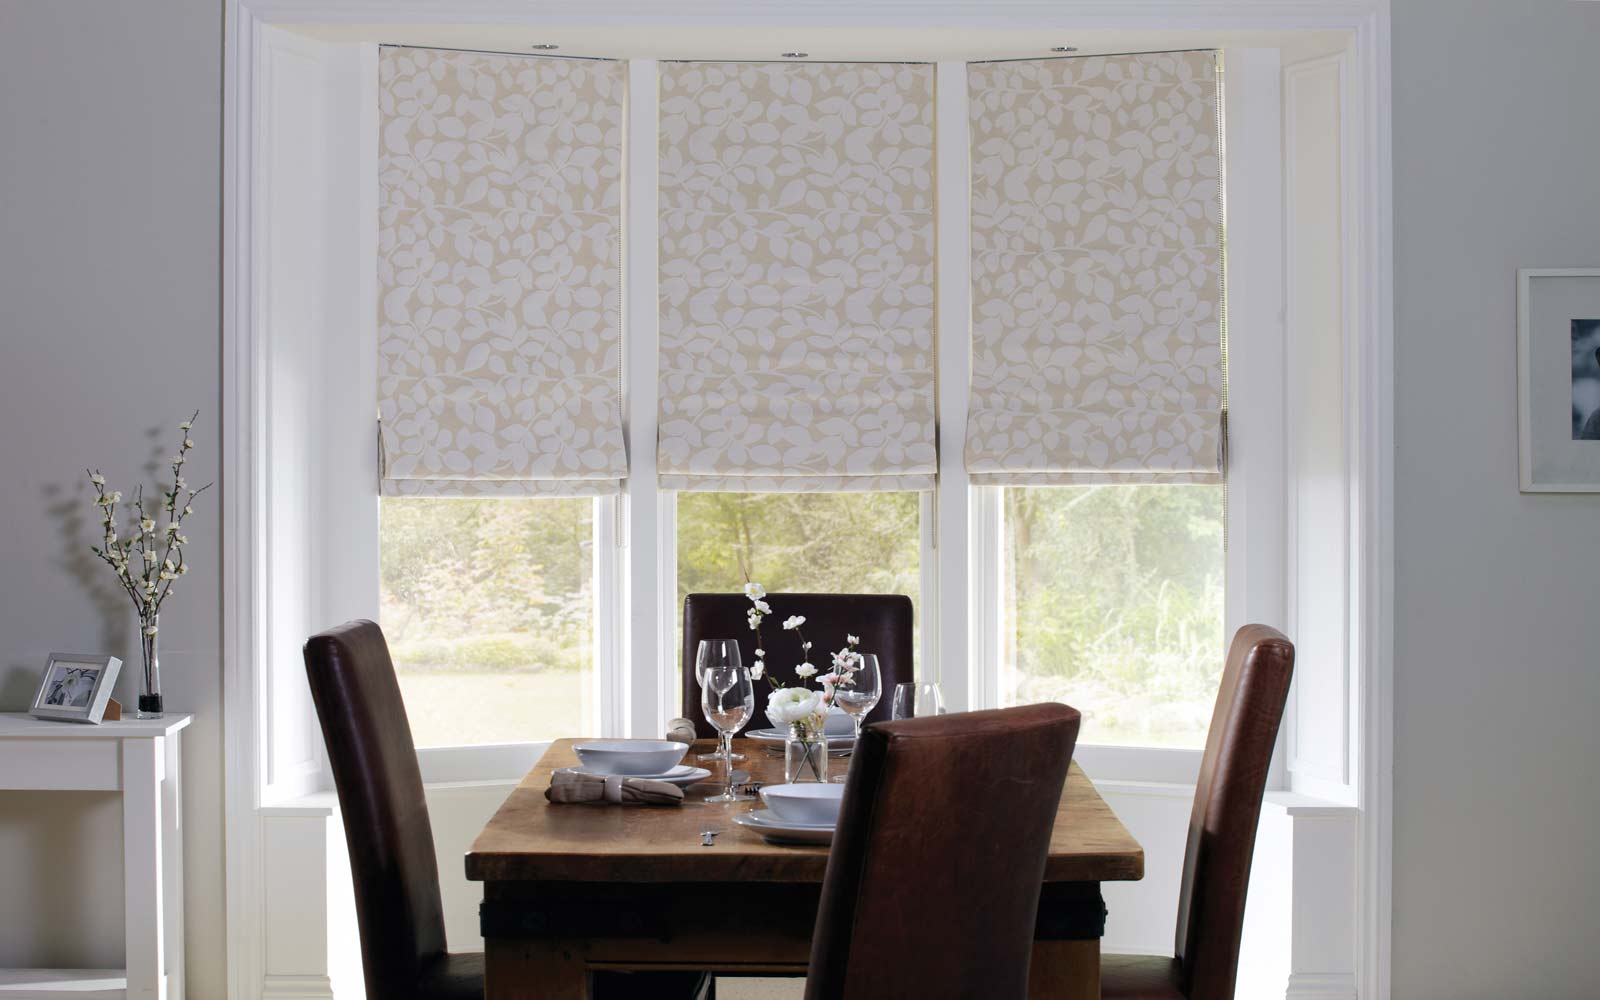 Roman Blinds in a Bay